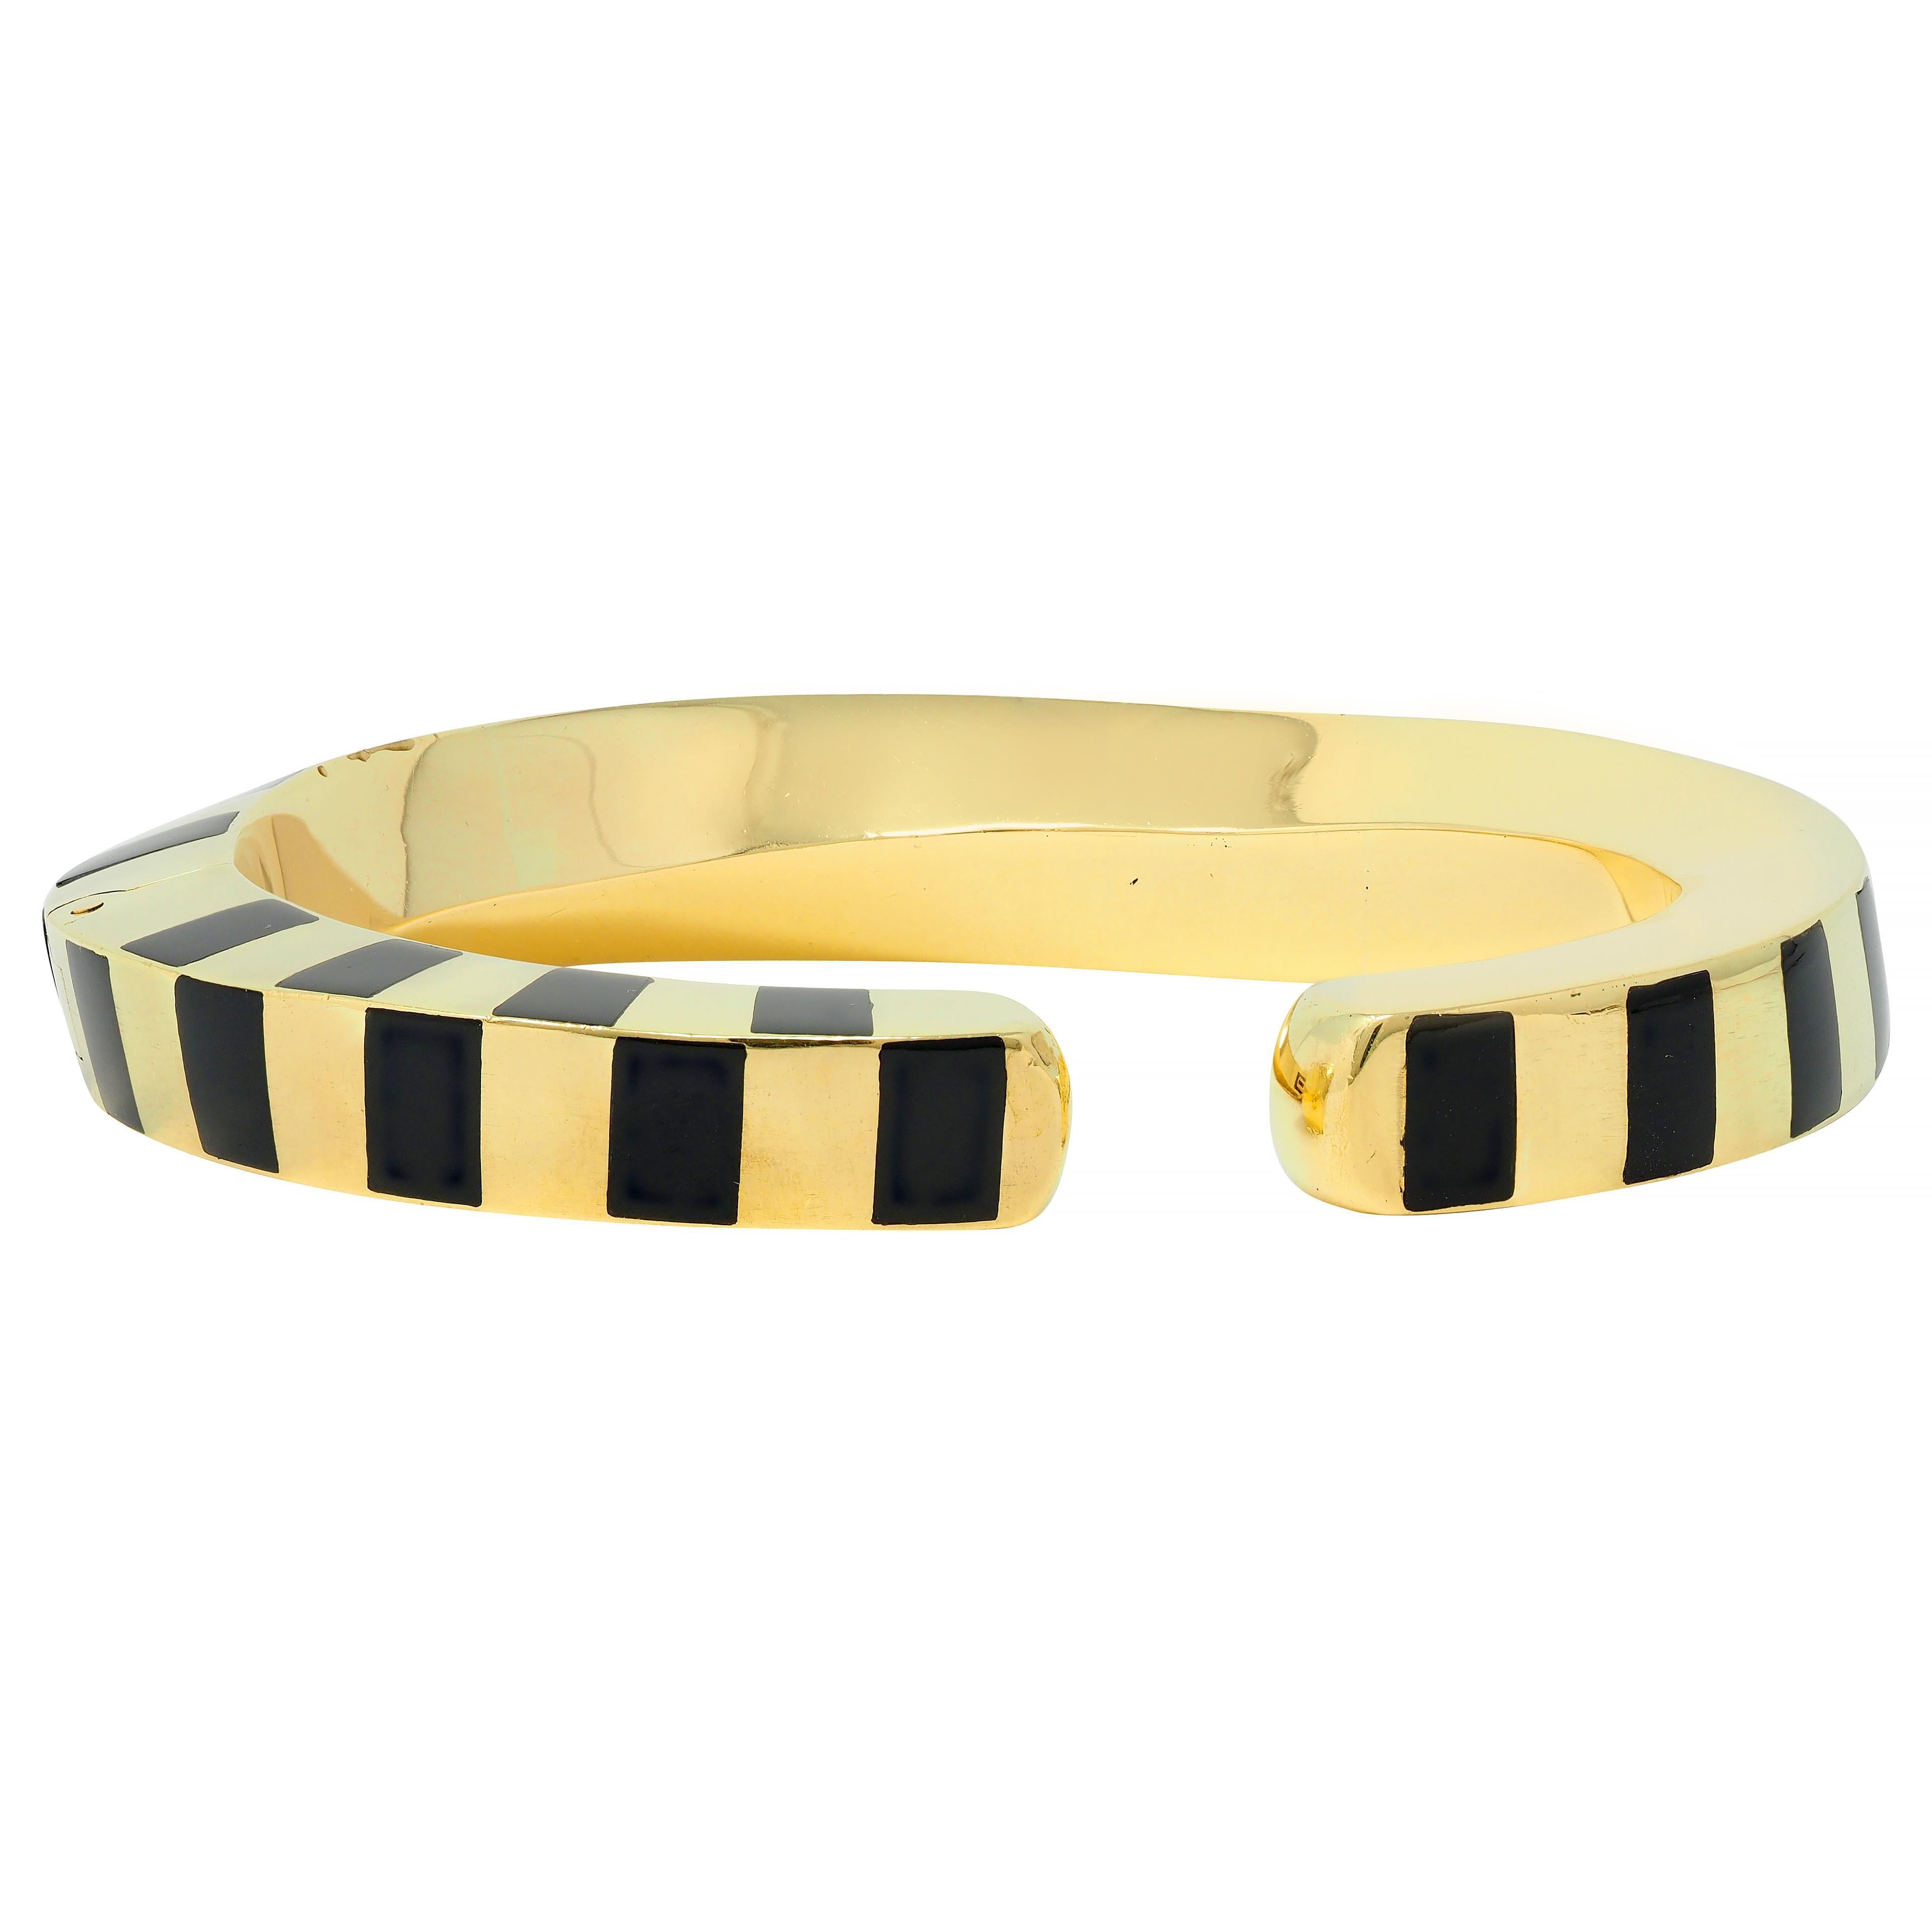 Tiffany & Co. Onyx 18 Karat Yellow Gold Twisted Stripe Vintage Bangle Bracelet In Excellent Condition For Sale In Philadelphia, PA